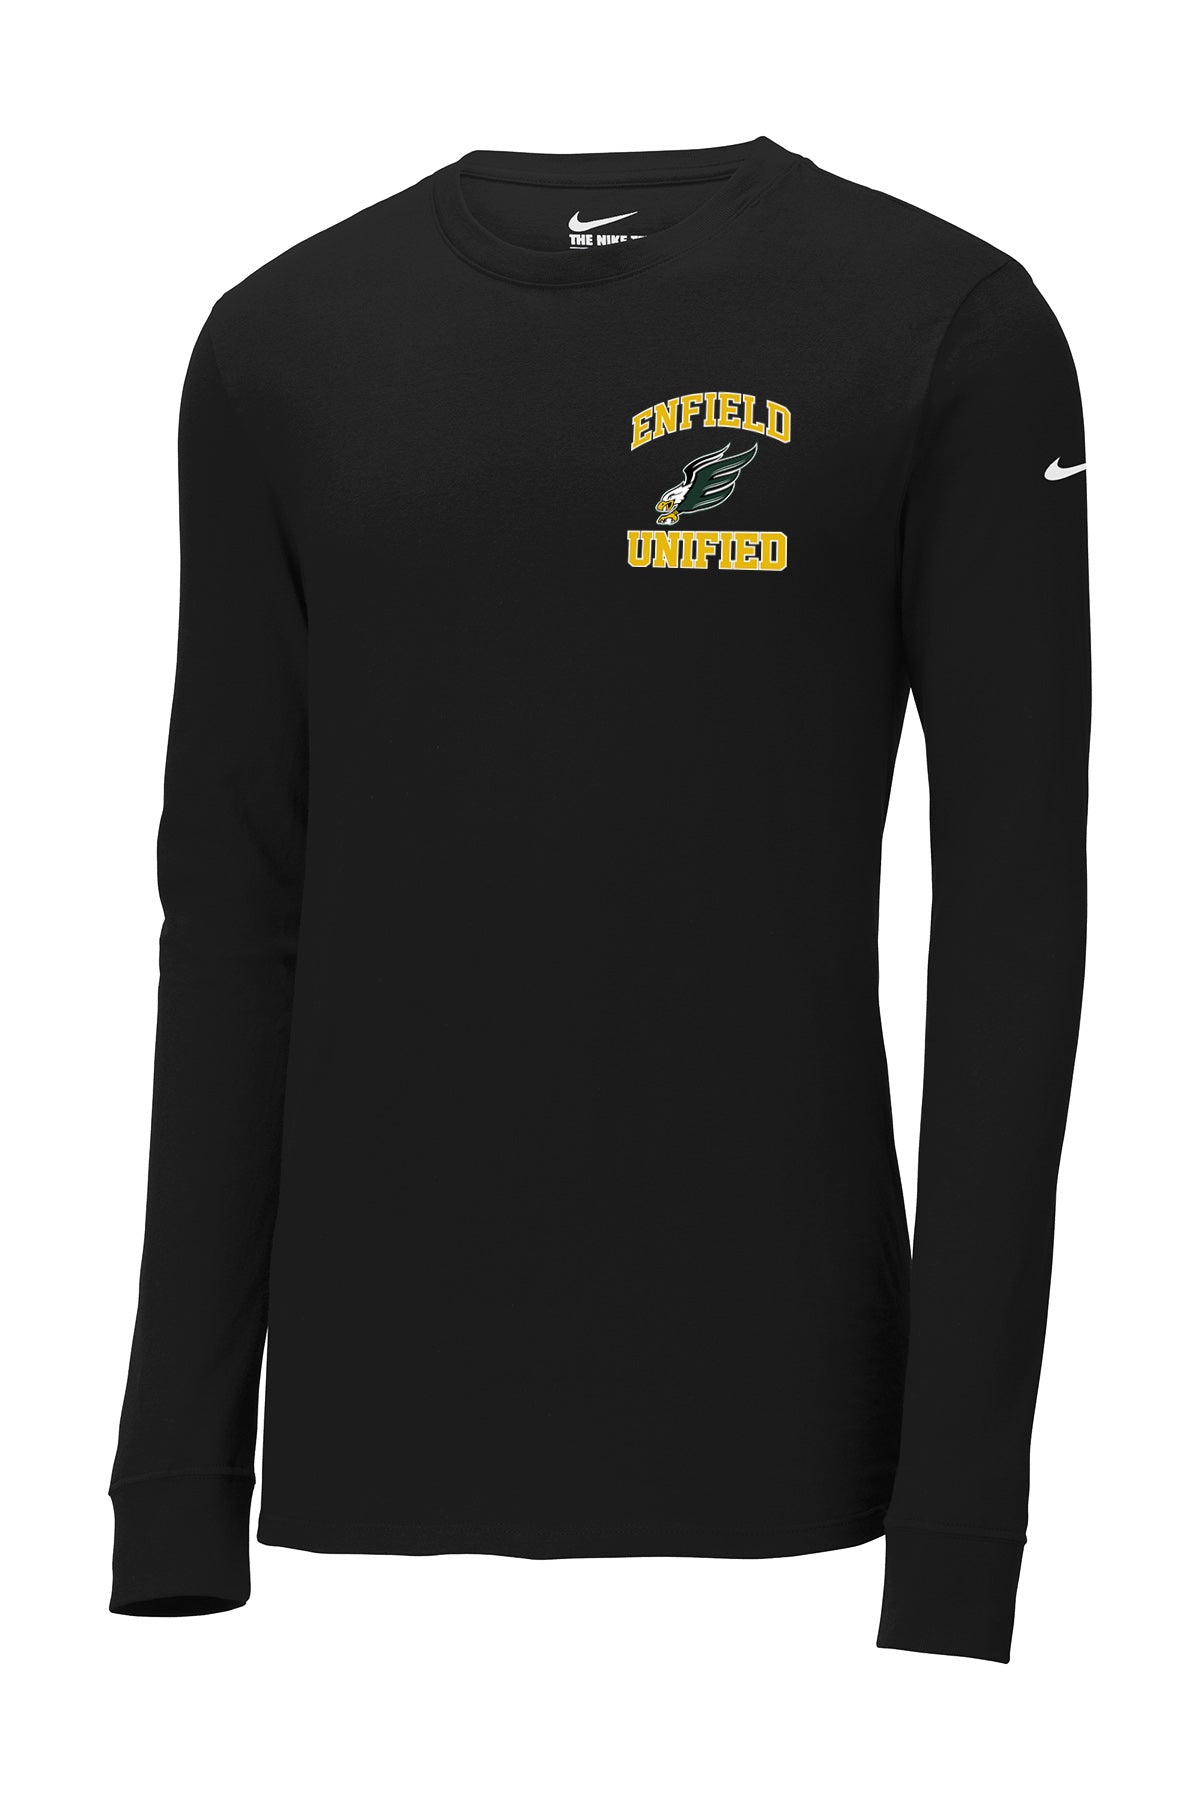 Unified Nike Dri-Fit Longsleeve Tee - NKBQ5230 (color options available)